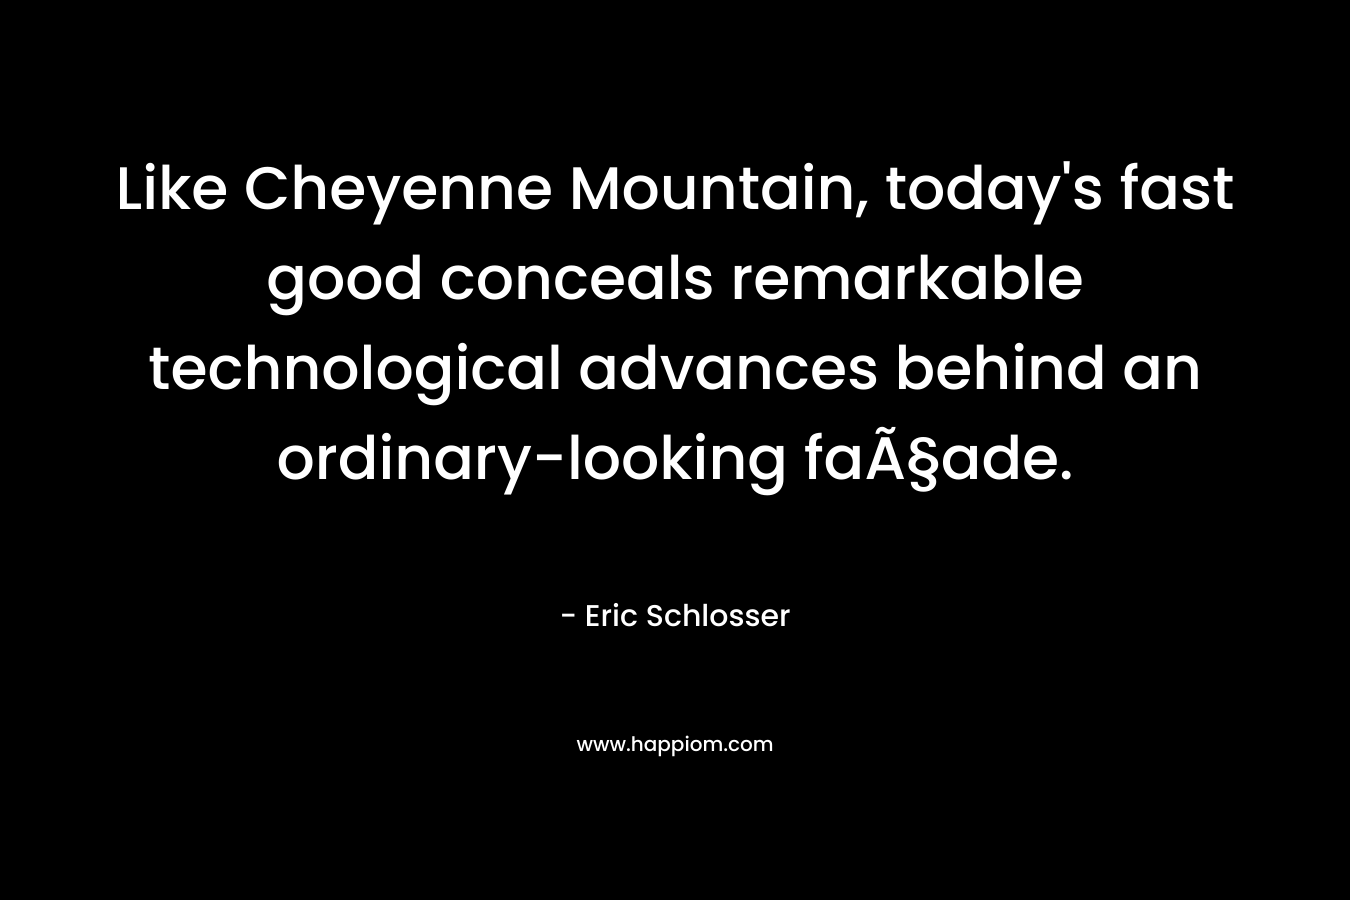 Like Cheyenne Mountain, today's fast good conceals remarkable technological advances behind an ordinary-looking faÃ§ade.